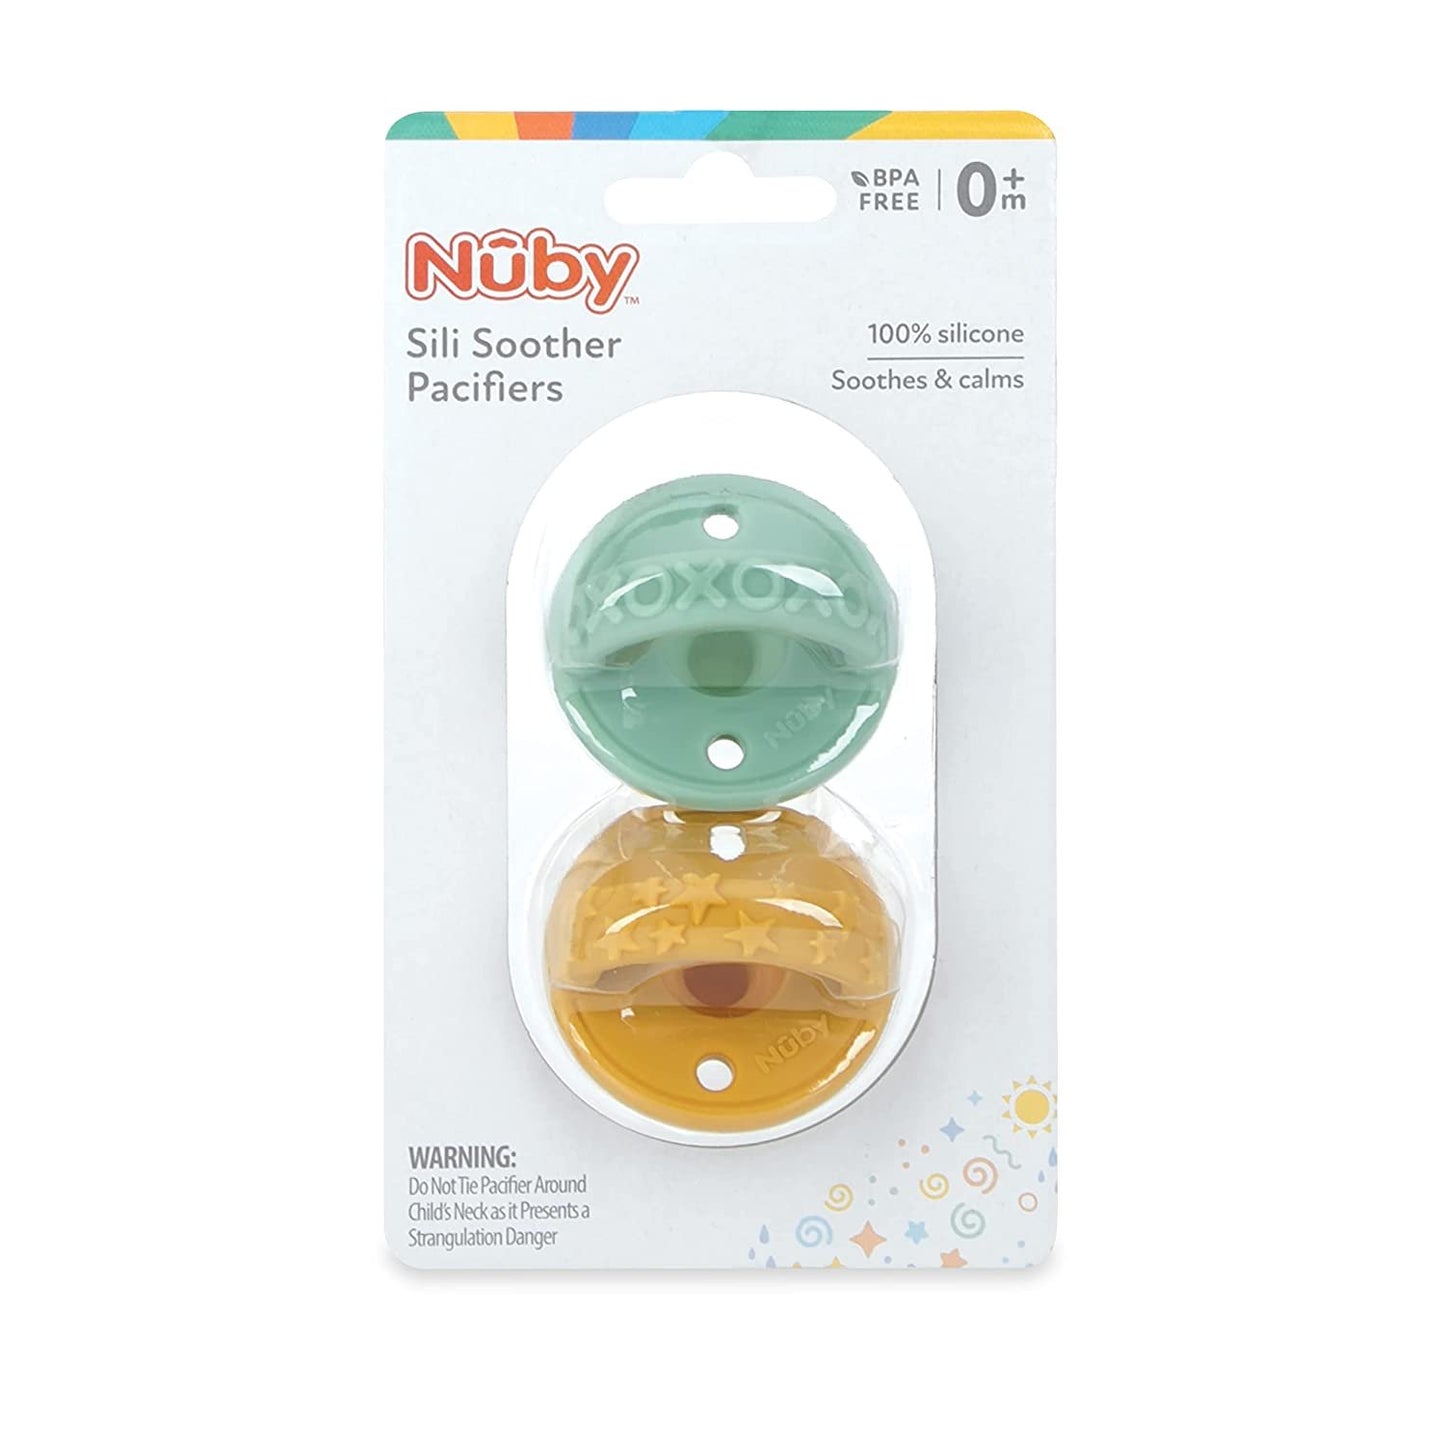 Nuby 2 Pack Silicone Pacifier with Natural Cherry Shaped Nipple - 0+ Months, 2 Pack, Colors May Vary